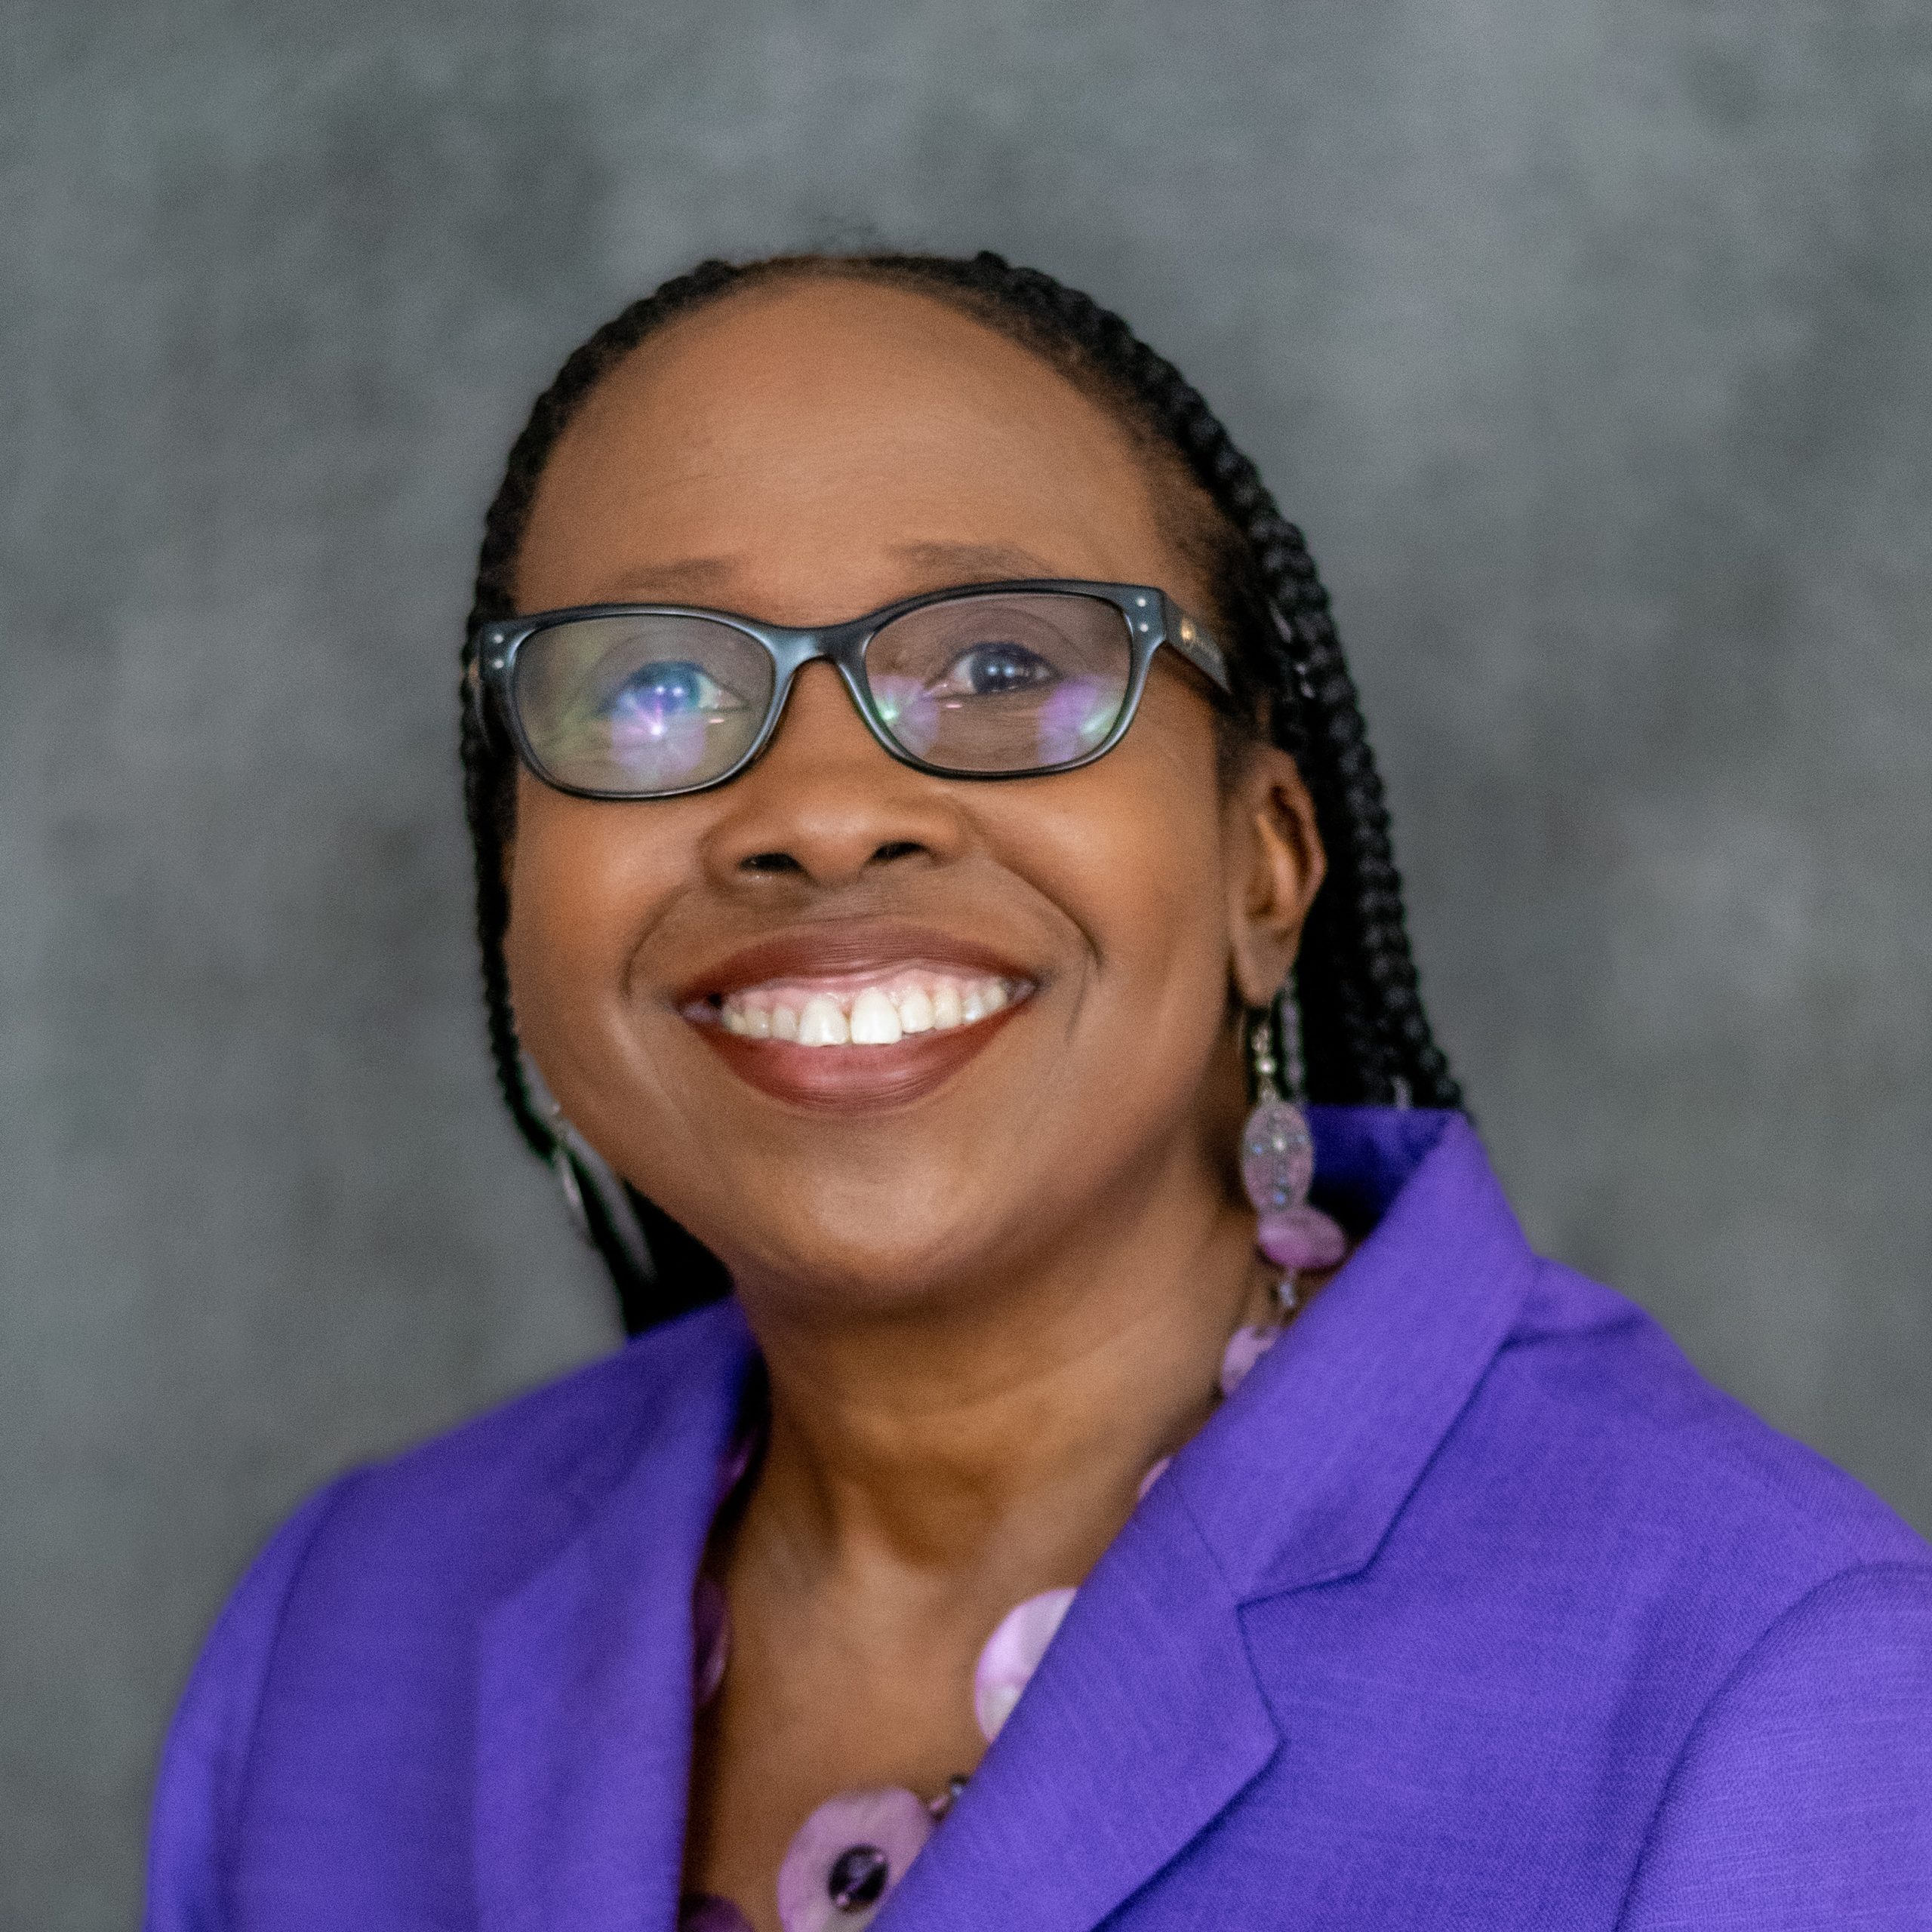 DeLaine Priest is a black woman wearing glasses and a purple suit